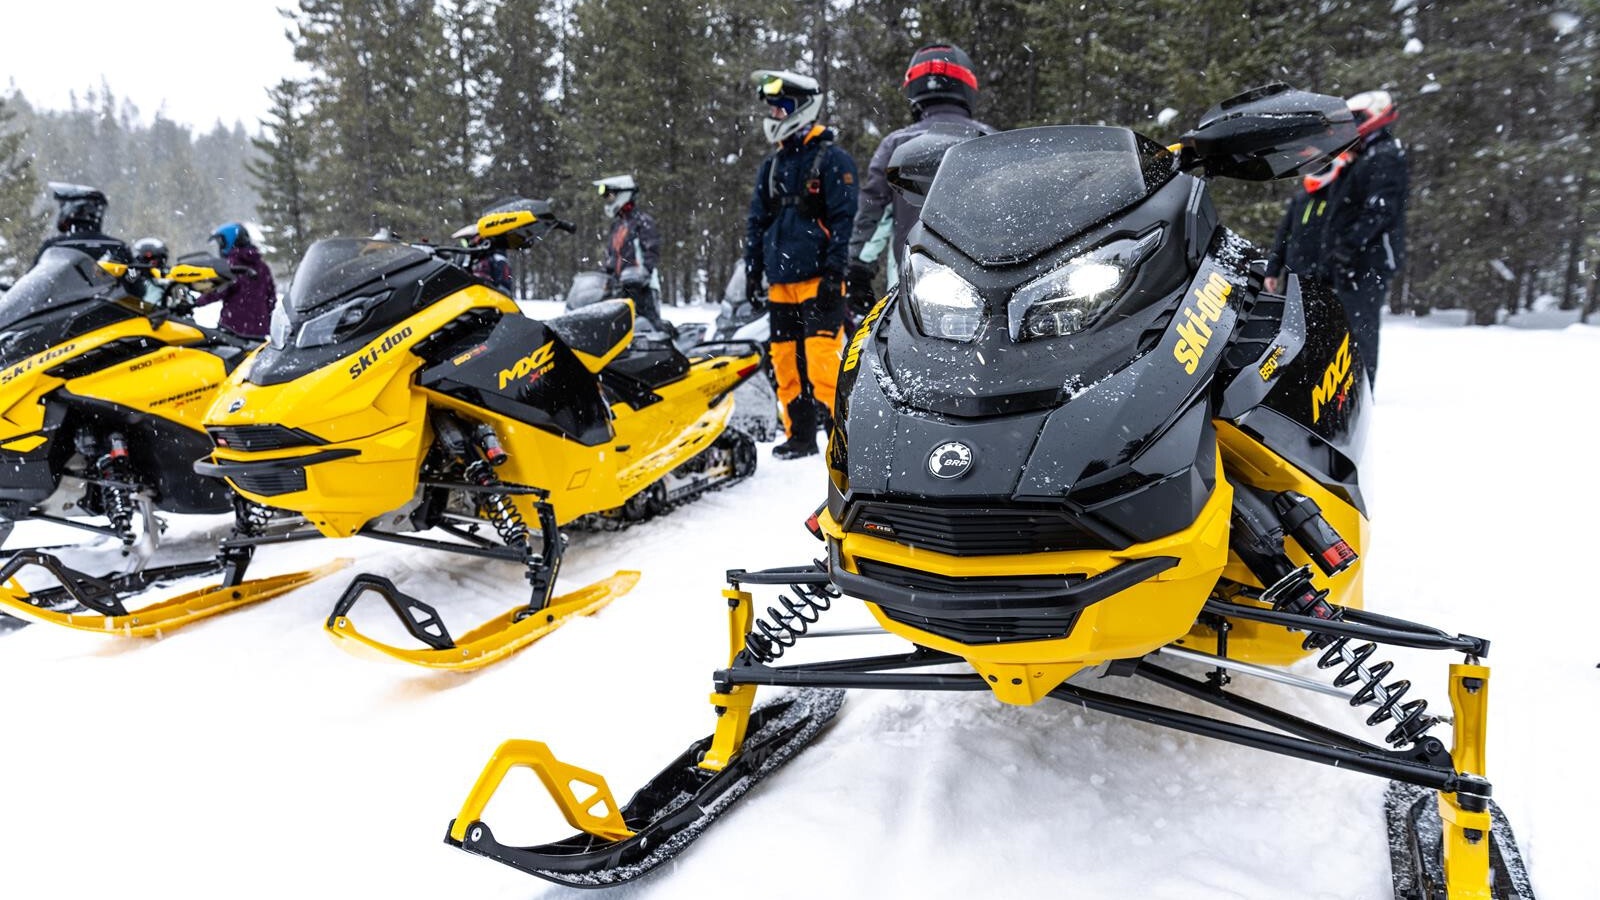 Currently, Ski-Doo is the only snowmobile manufacturer with sleds that meet park rules for emissions and noise. Ski-Doo’s four-stroke models meet both requirements.